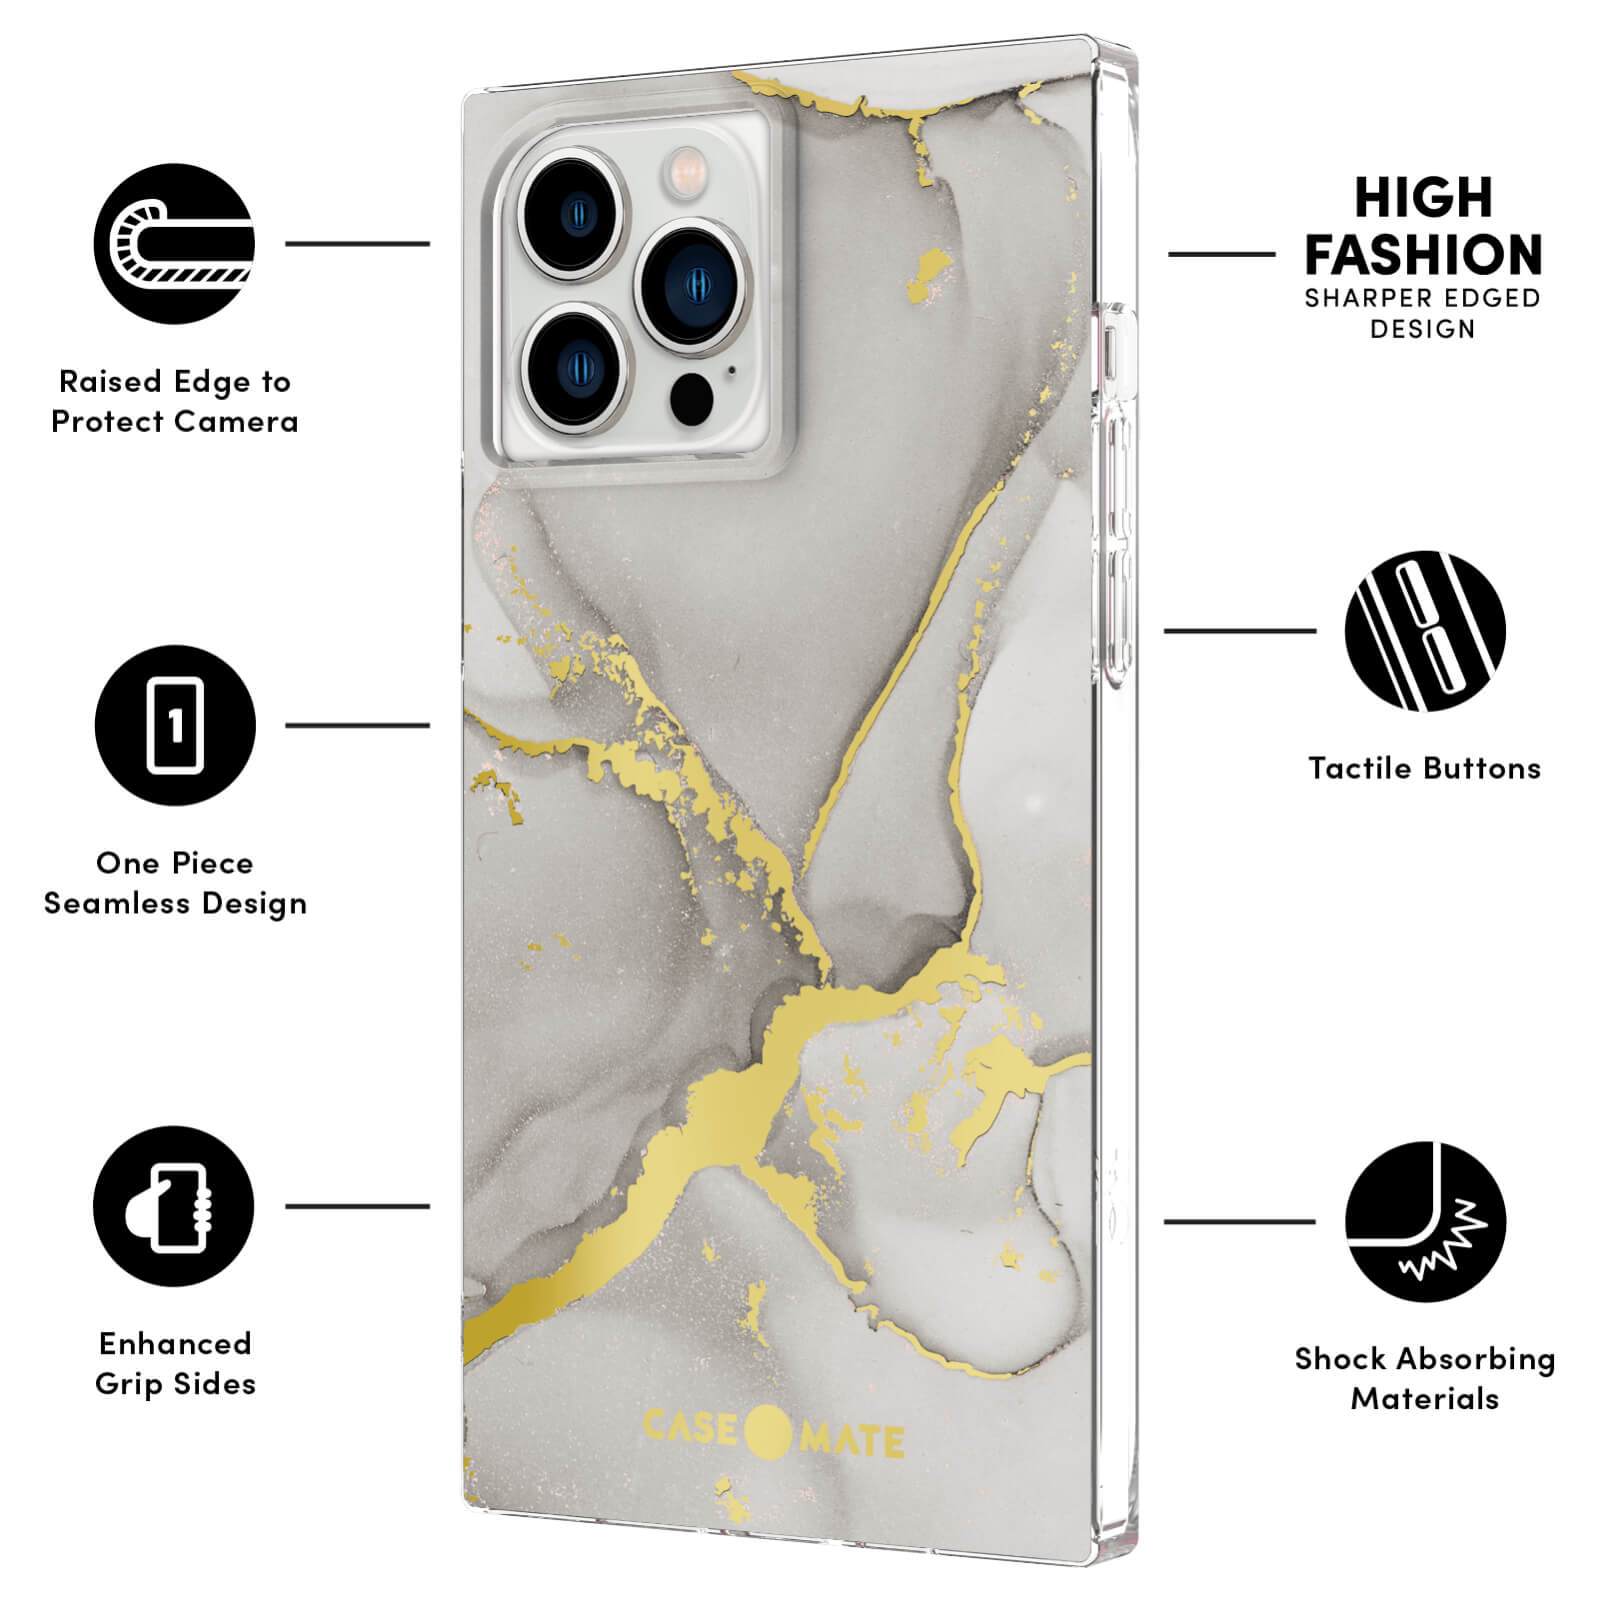 FEATURES: RAISED EDGE TO PROTECT CAMERA, ONE PIECE SEAMLESS DESIGN, ENHANCED GRIP SIDES, HIGH FASHION SHARPR EDGED DESIGN, TACTILE BUTTONS, SHOCK ABSORBING MATERIALS. COLOR::FOG MARBLE